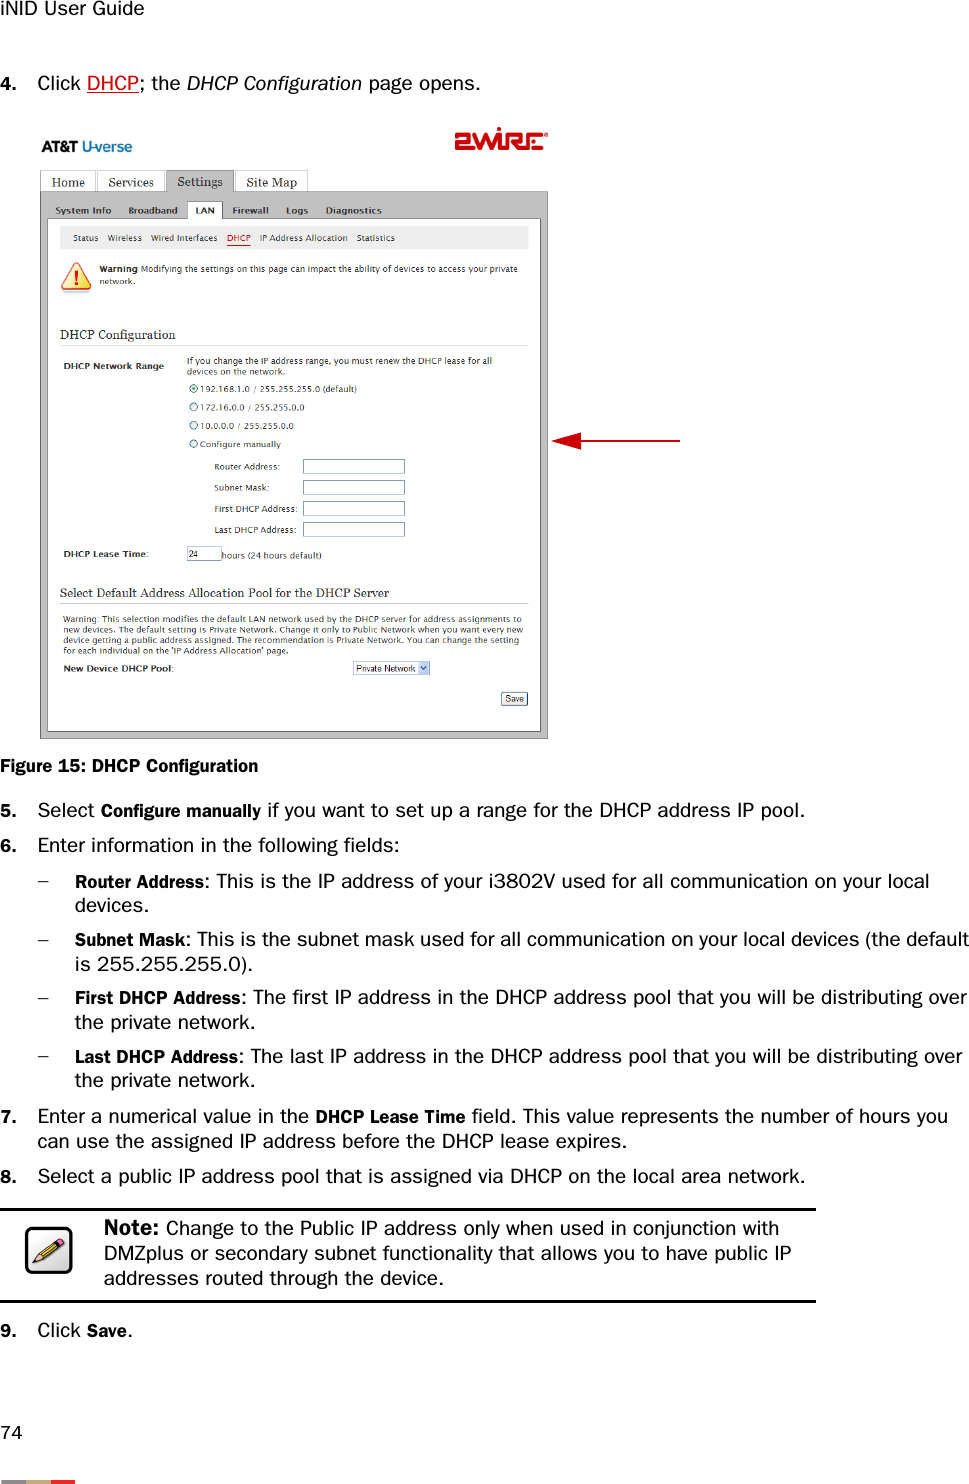 iNID User Guide744. Click DHCP; the DHCP Configuration page opens. Figure 15: DHCP Configuration5. Select Configure manually if you want to set up a range for the DHCP address IP pool. 6. Enter information in the following fields:−Router Address: This is the IP address of your i3802V used for all communication on your local devices. −Subnet Mask: This is the subnet mask used for all communication on your local devices (the default is 255.255.255.0). −First DHCP Address: The first IP address in the DHCP address pool that you will be distributing over the private network.−Last DHCP Address: The last IP address in the DHCP address pool that you will be distributing over the private network.7. Enter a numerical value in the DHCP Lease Time field. This value represents the number of hours you can use the assigned IP address before the DHCP lease expires.8. Select a public IP address pool that is assigned via DHCP on the local area network. 9. Click Save. Note: Change to the Public IP address only when used in conjunction with DMZplus or secondary subnet functionality that allows you to have public IP addresses routed through the device. 